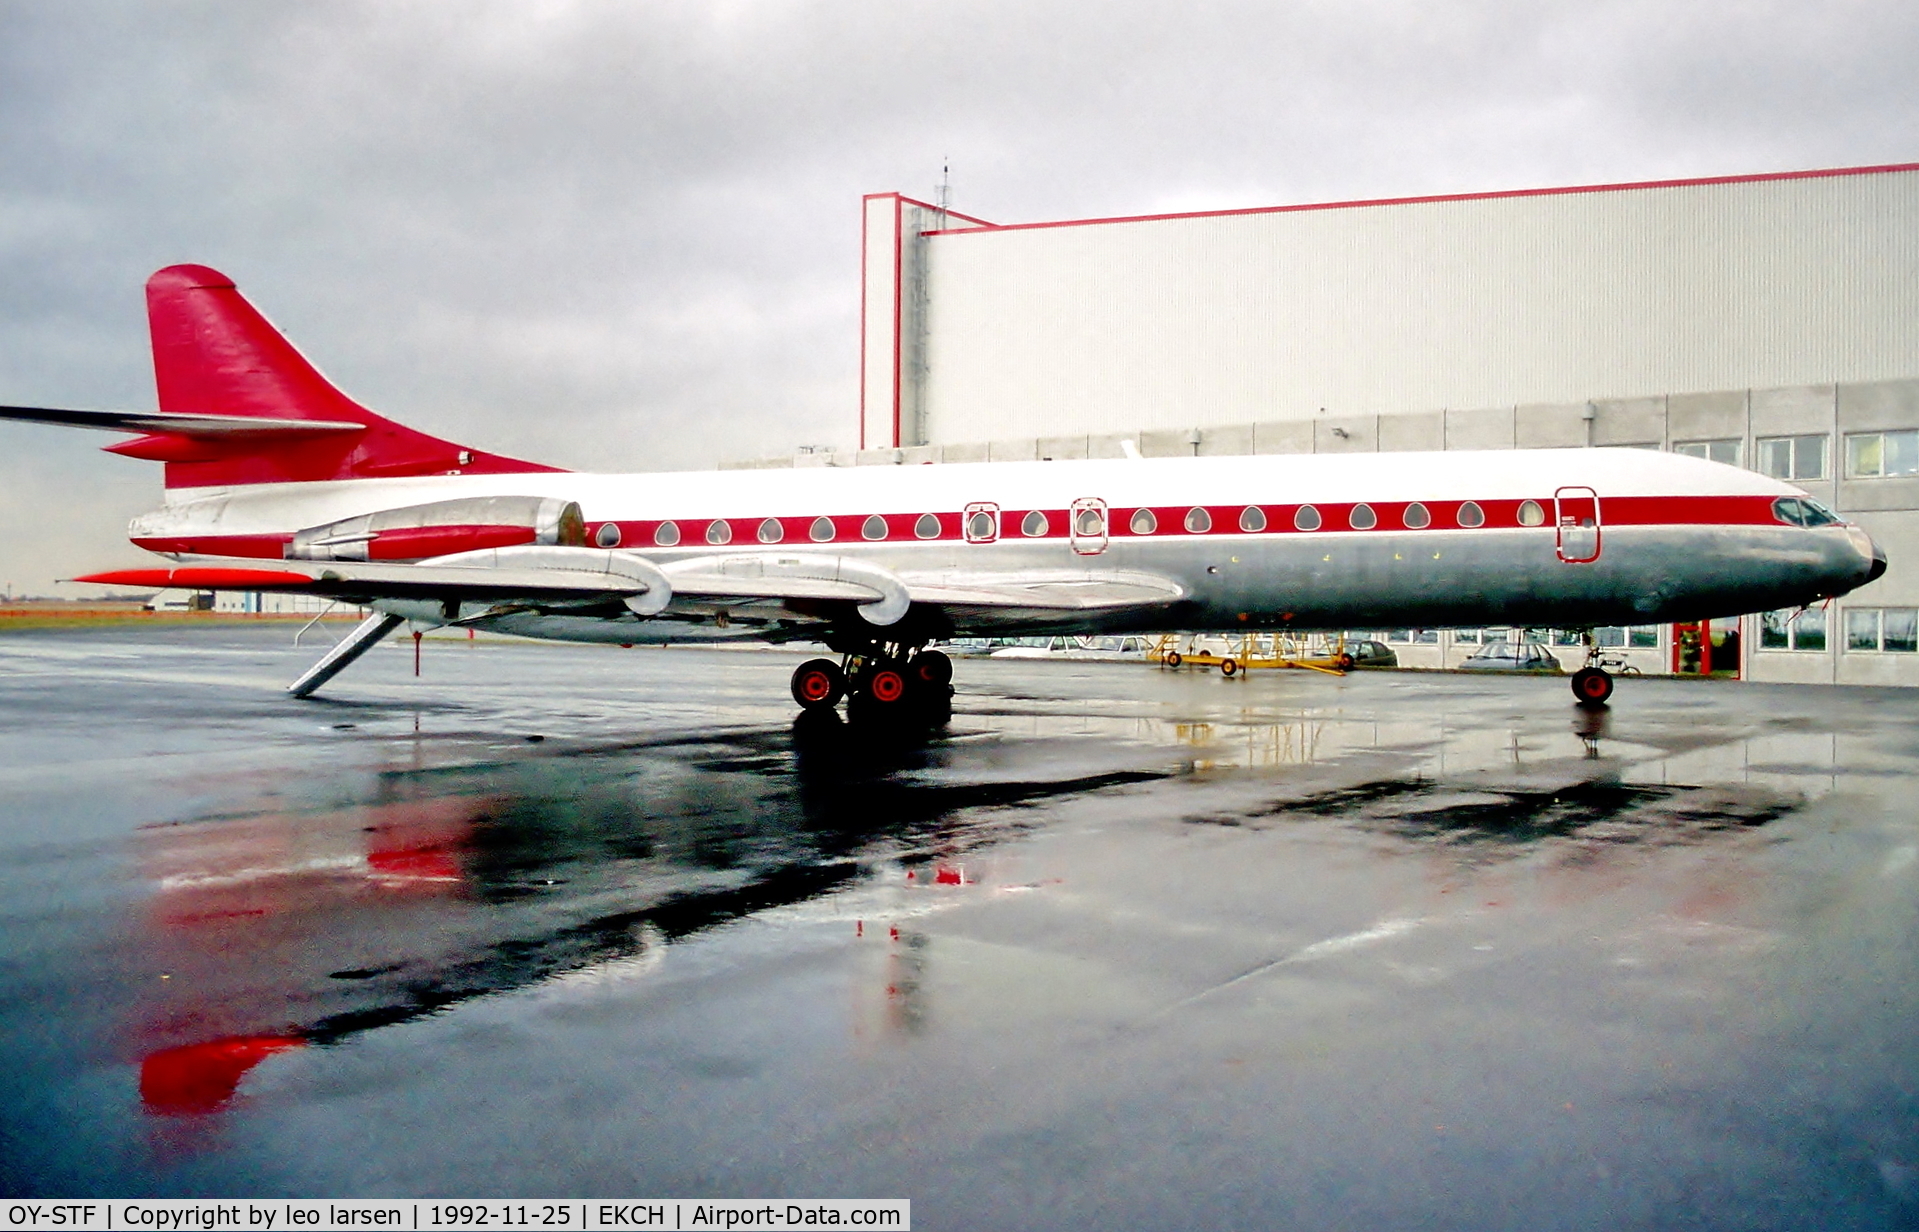 OY-STF, 1969 Sud Aviation SE-210 Caravelle 10B3 Super B C/N 257, Copenhagen 25.11.92 before getting HK-3805X.note the TF on nose door